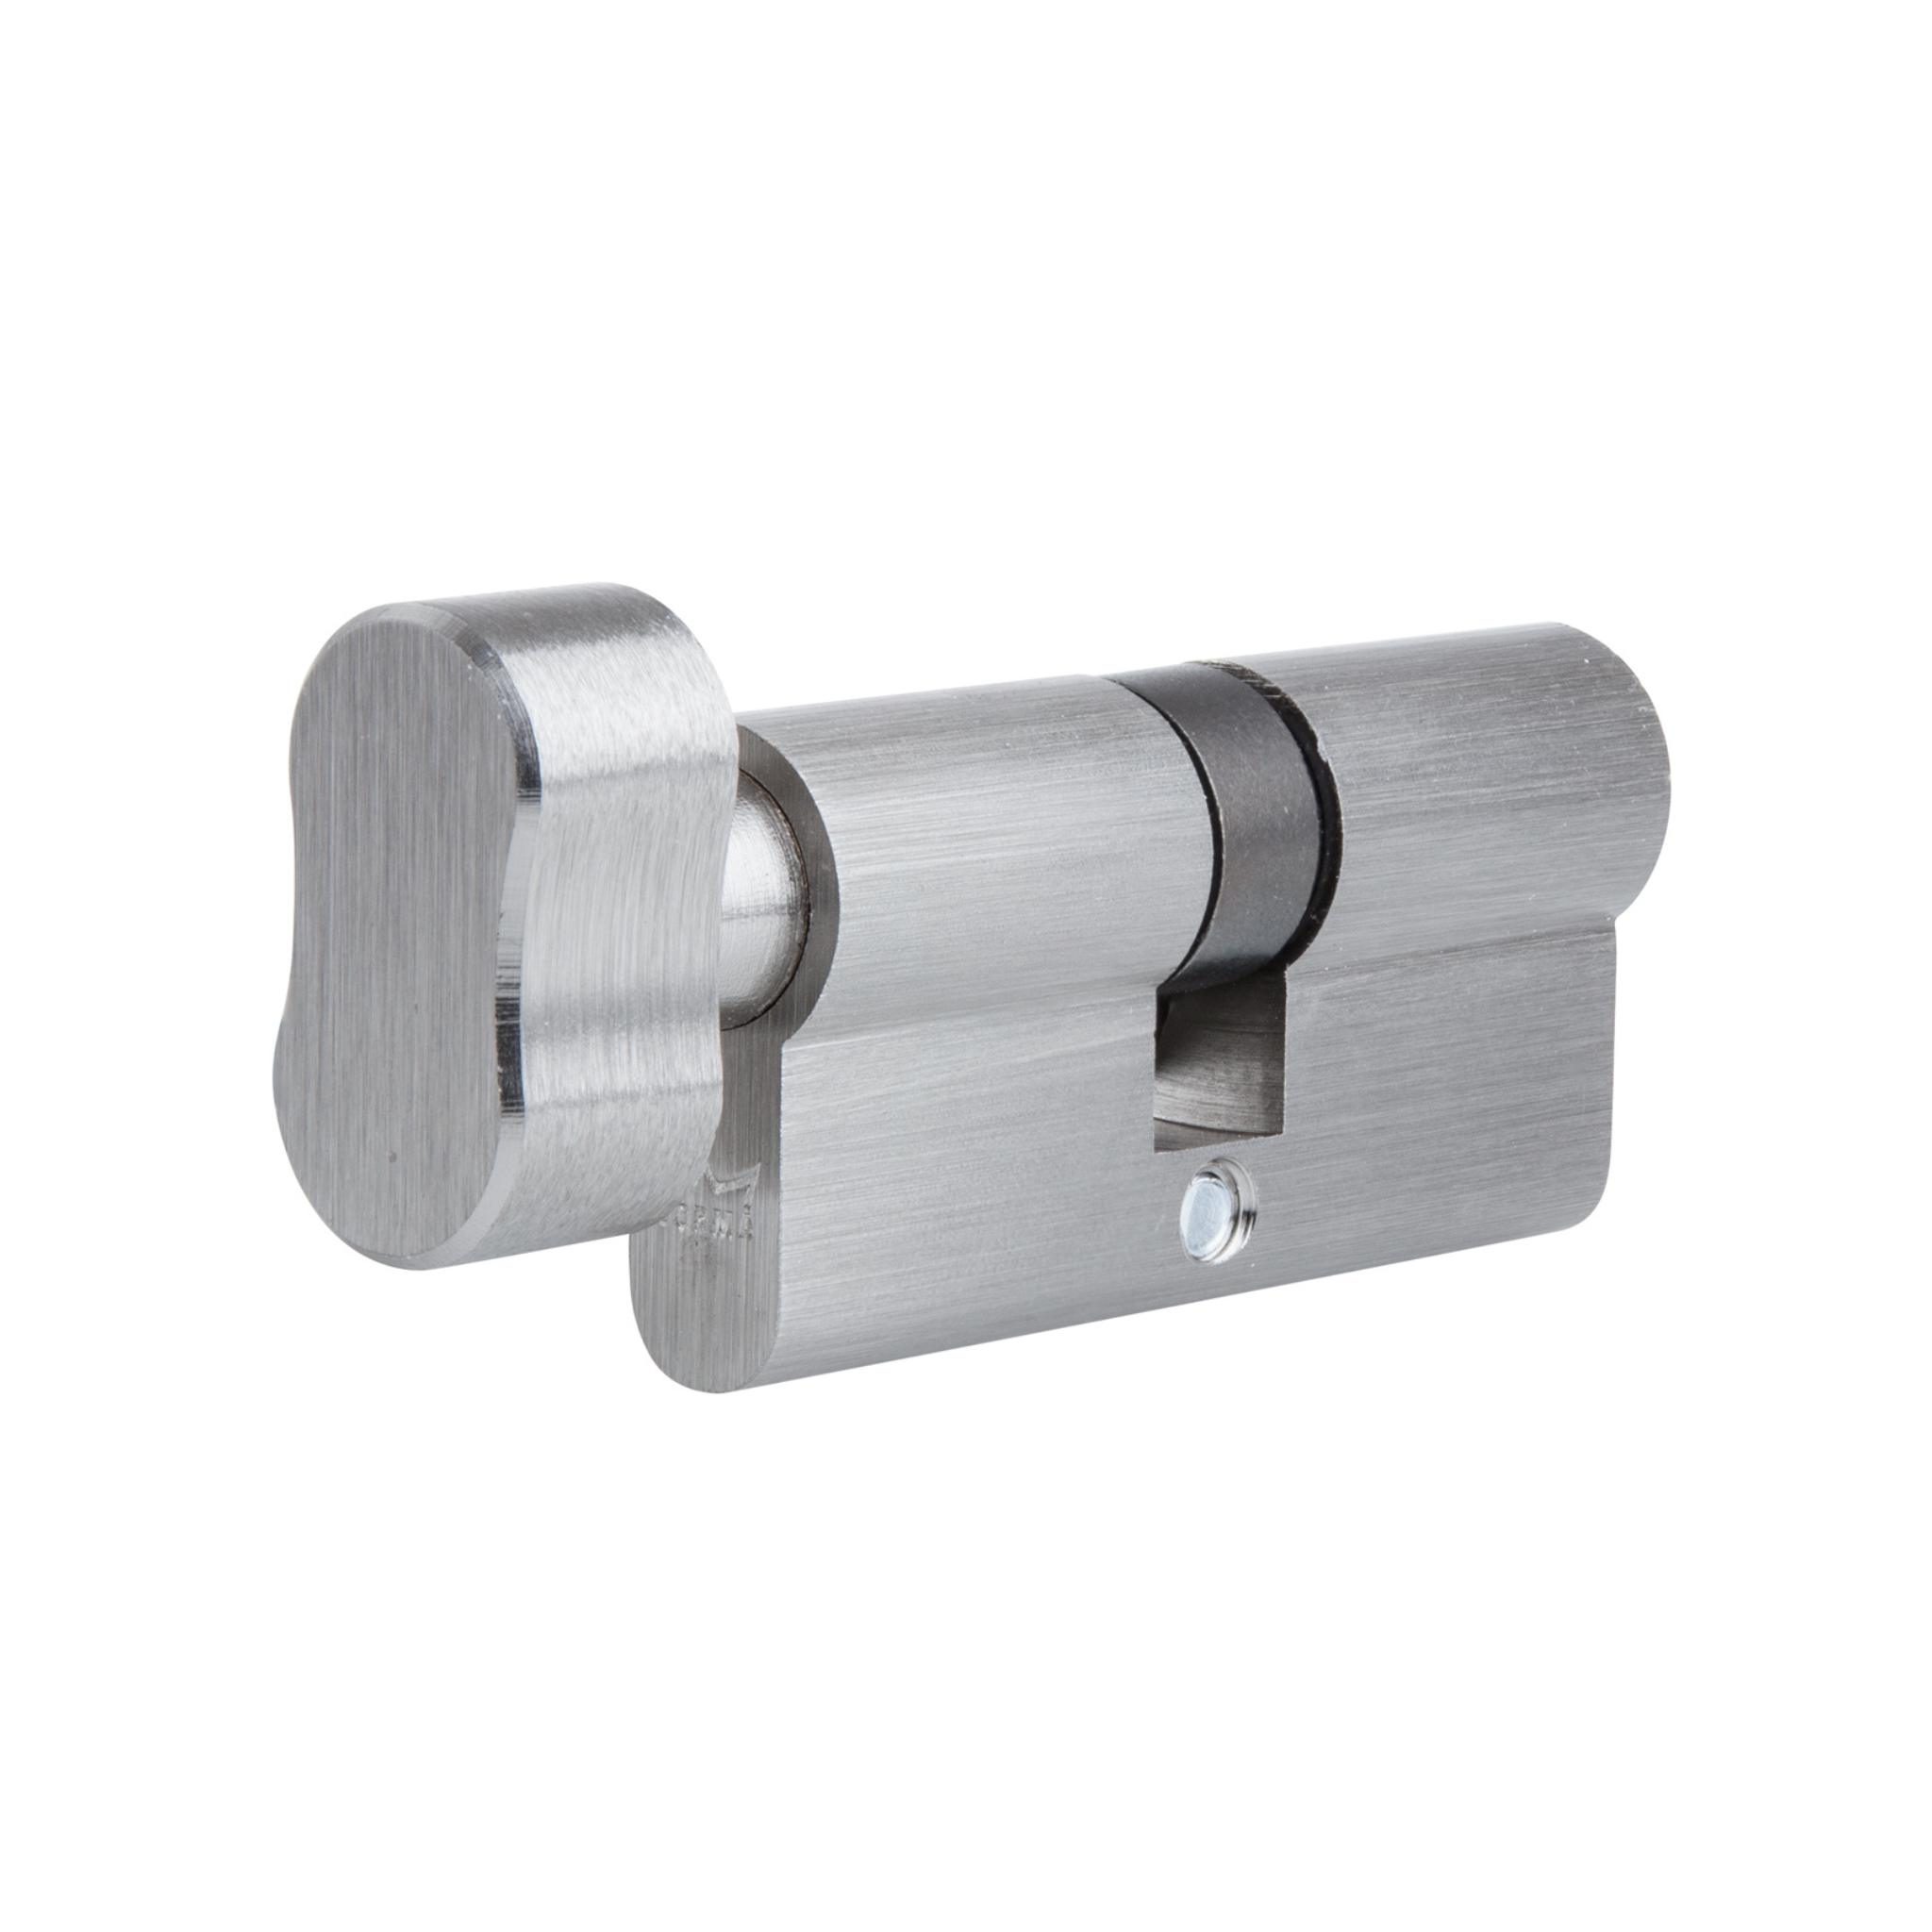 DKC056501 KD, 65mm - 33/33, Double Cylinder, Thumbturn to Key, Keyed to Differ (Standard), 2 Keys, 5 Pin, Satin Nickel, DORMAKABA